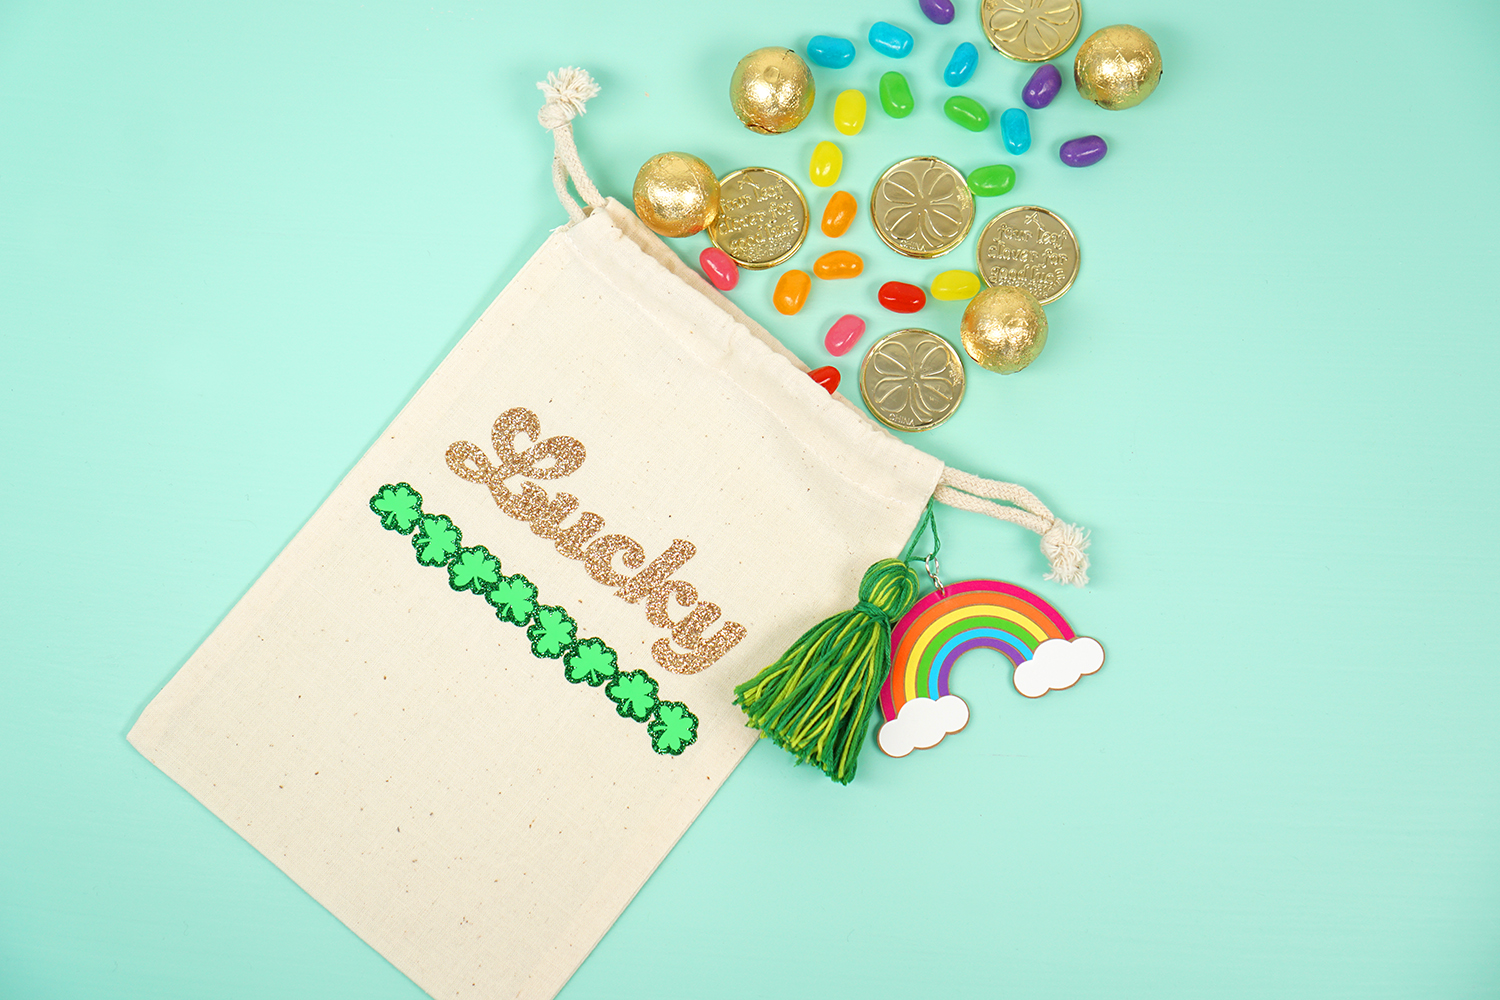 fully assembled treat bag for st patricks day with gold coins and candies